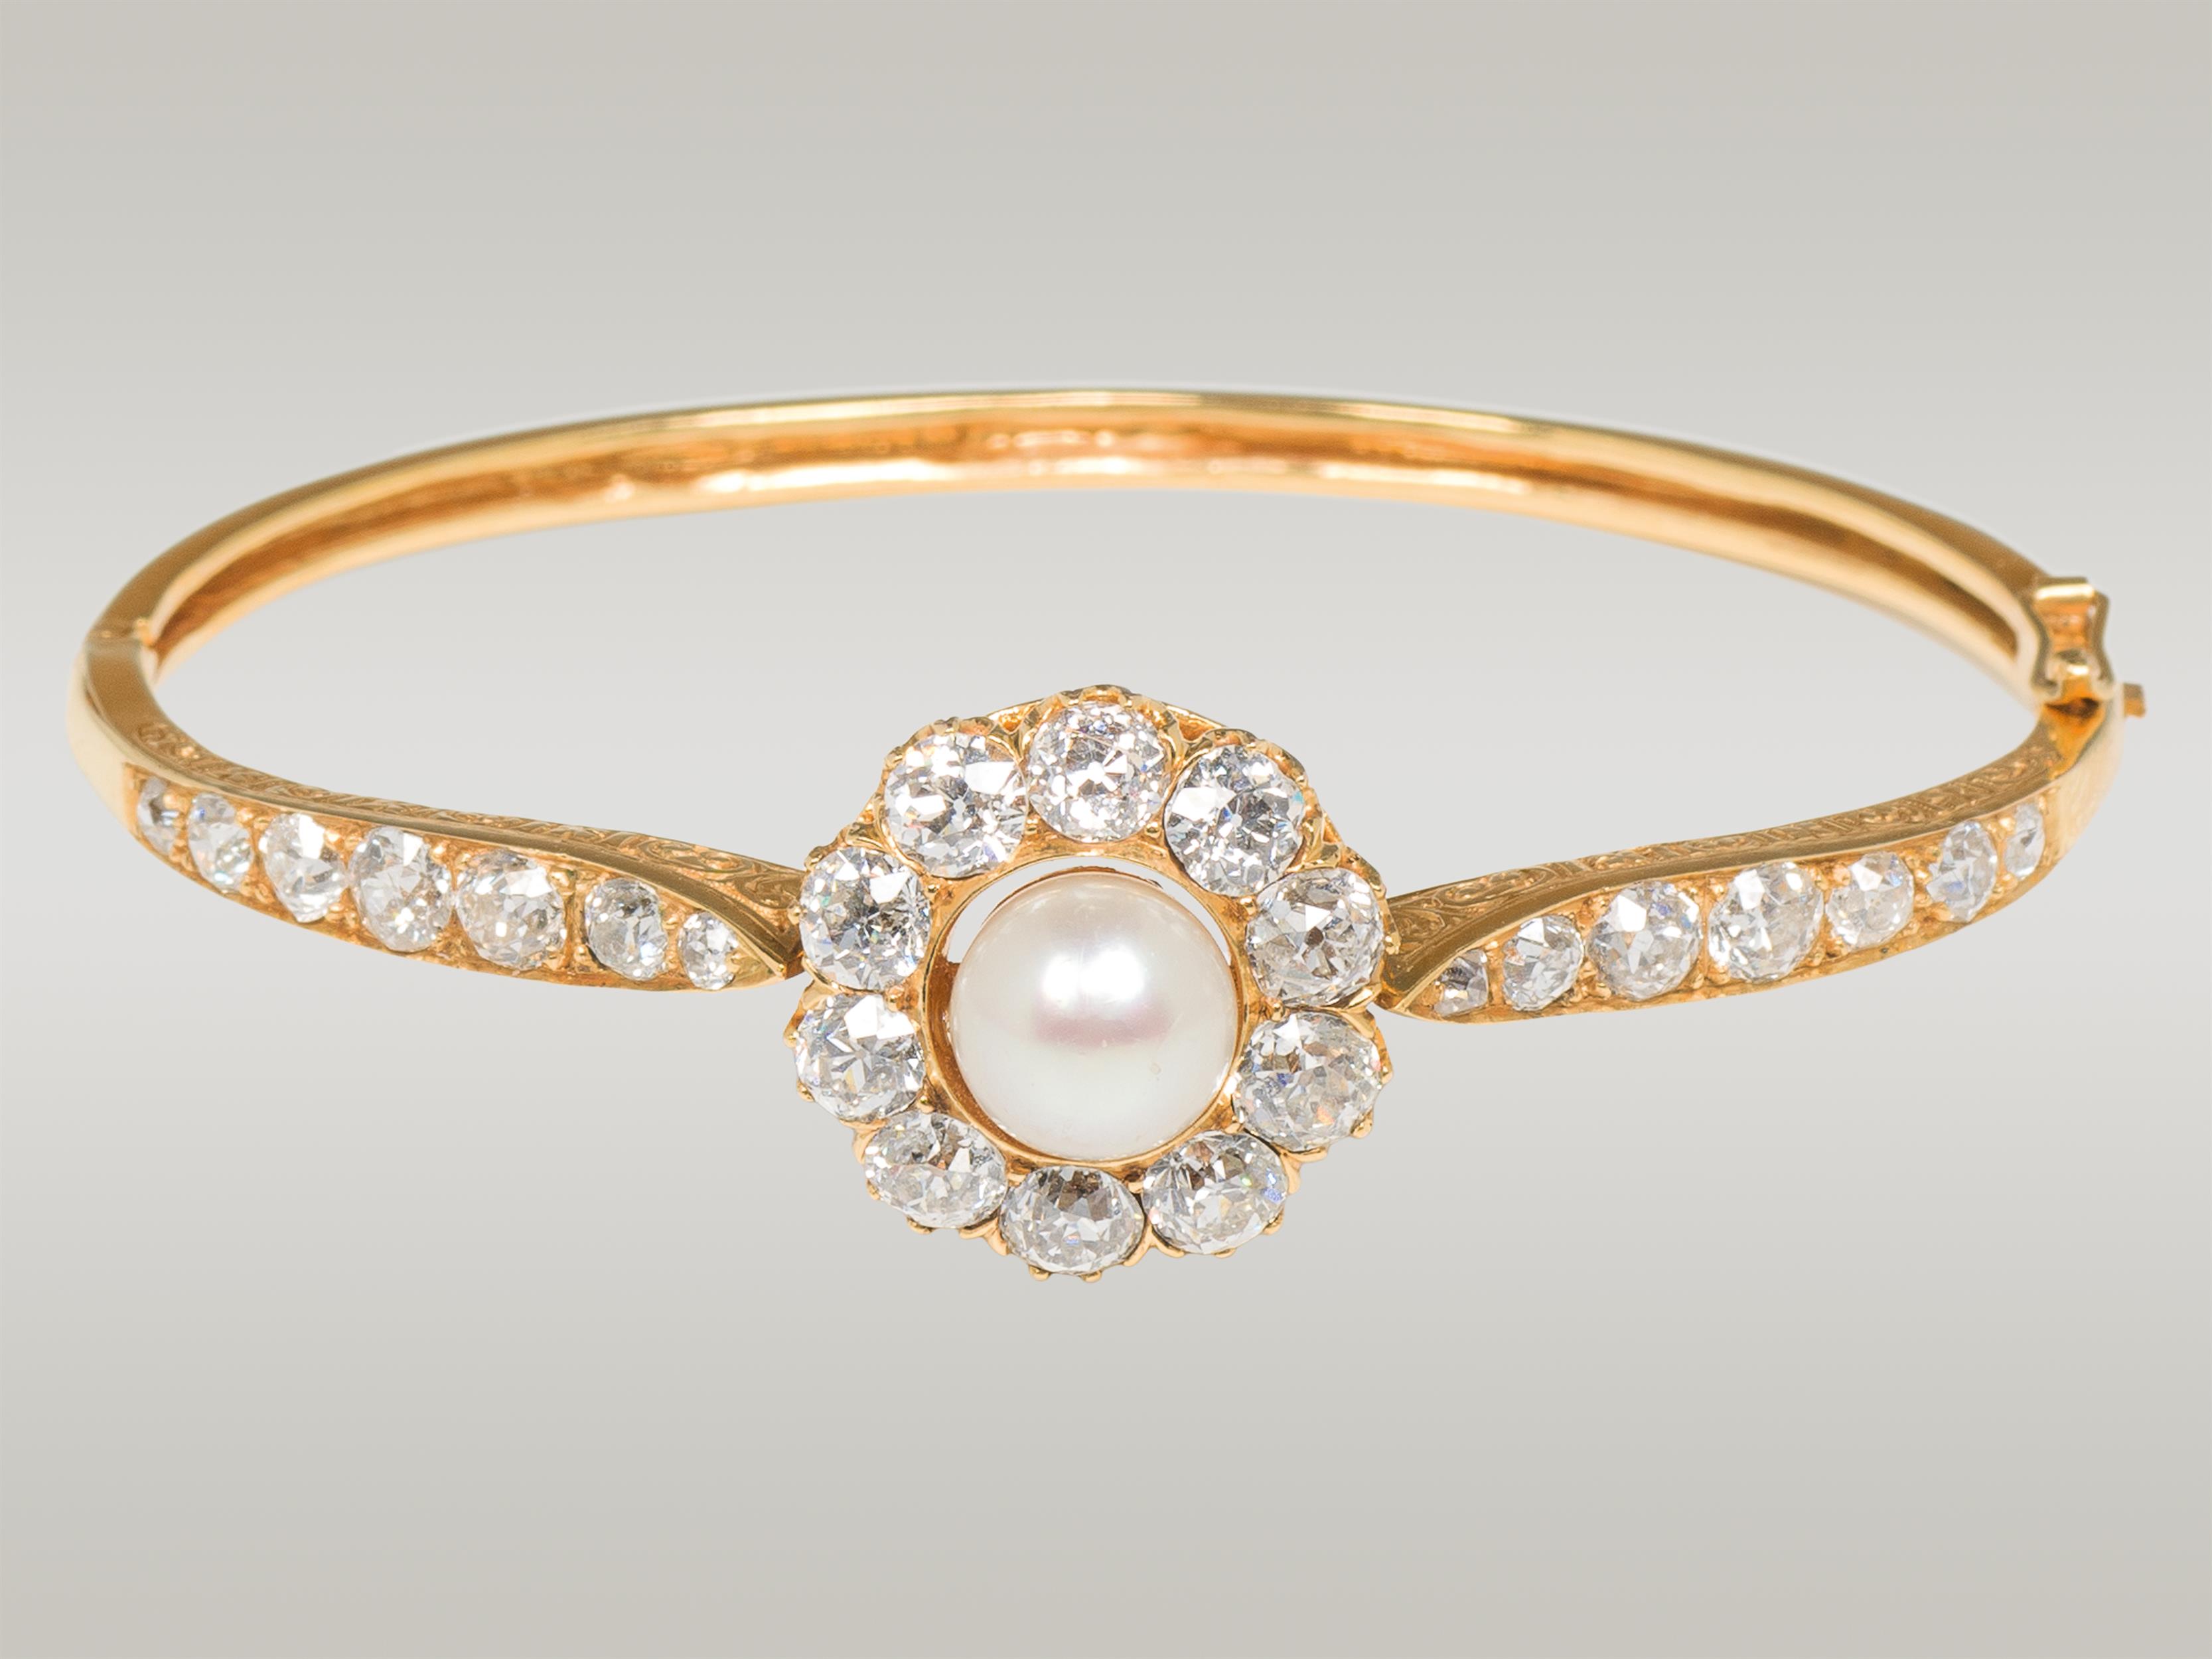 Diamond bracelet with natural pearl